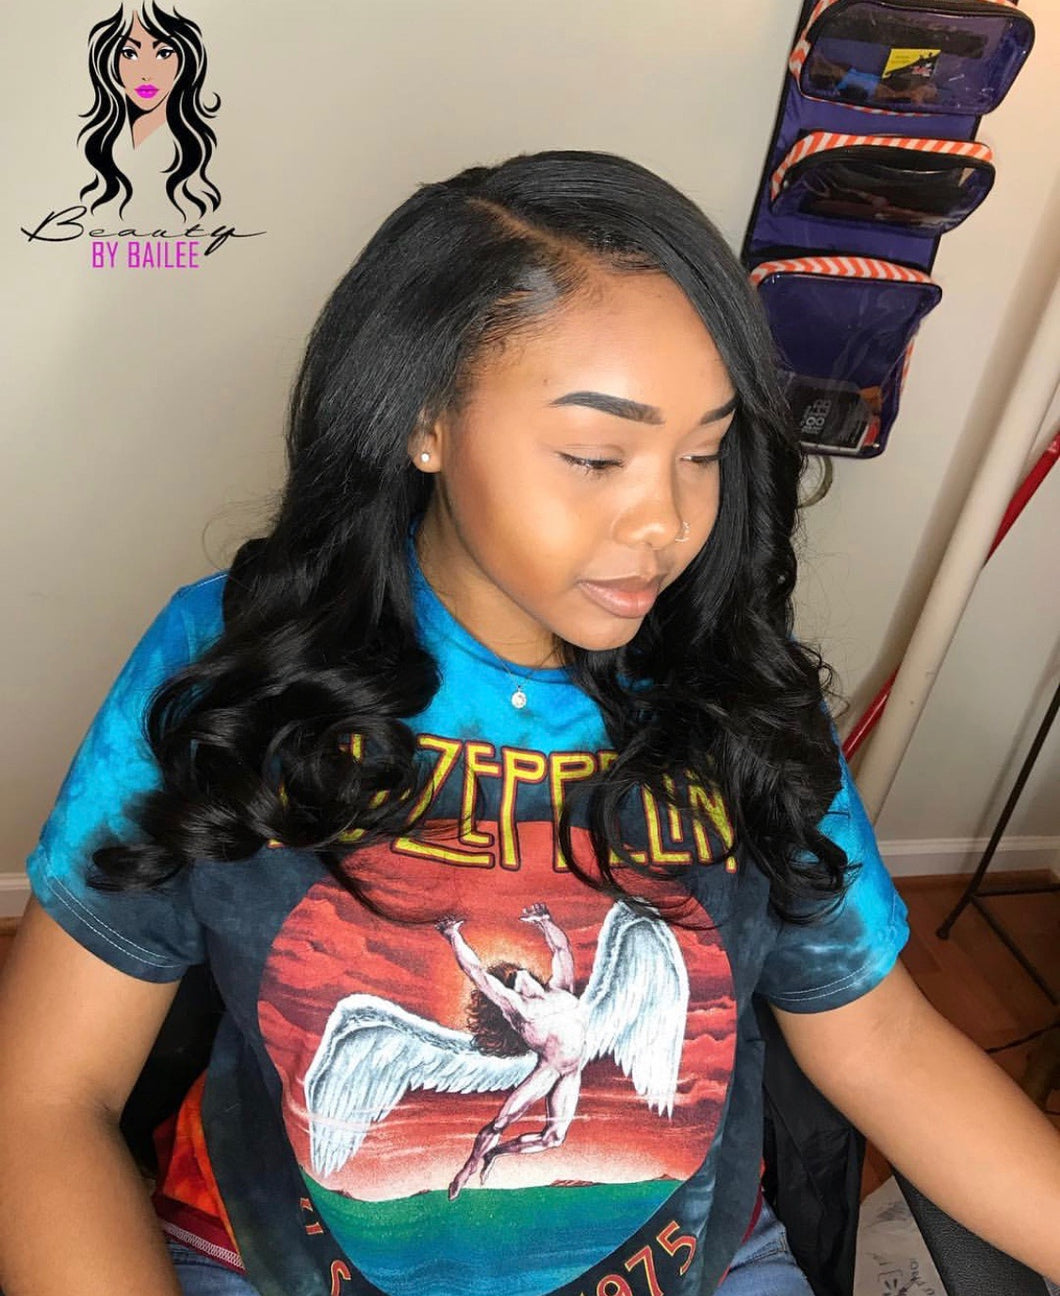 Traditional Install ($185.00) - Beautybybailee.com